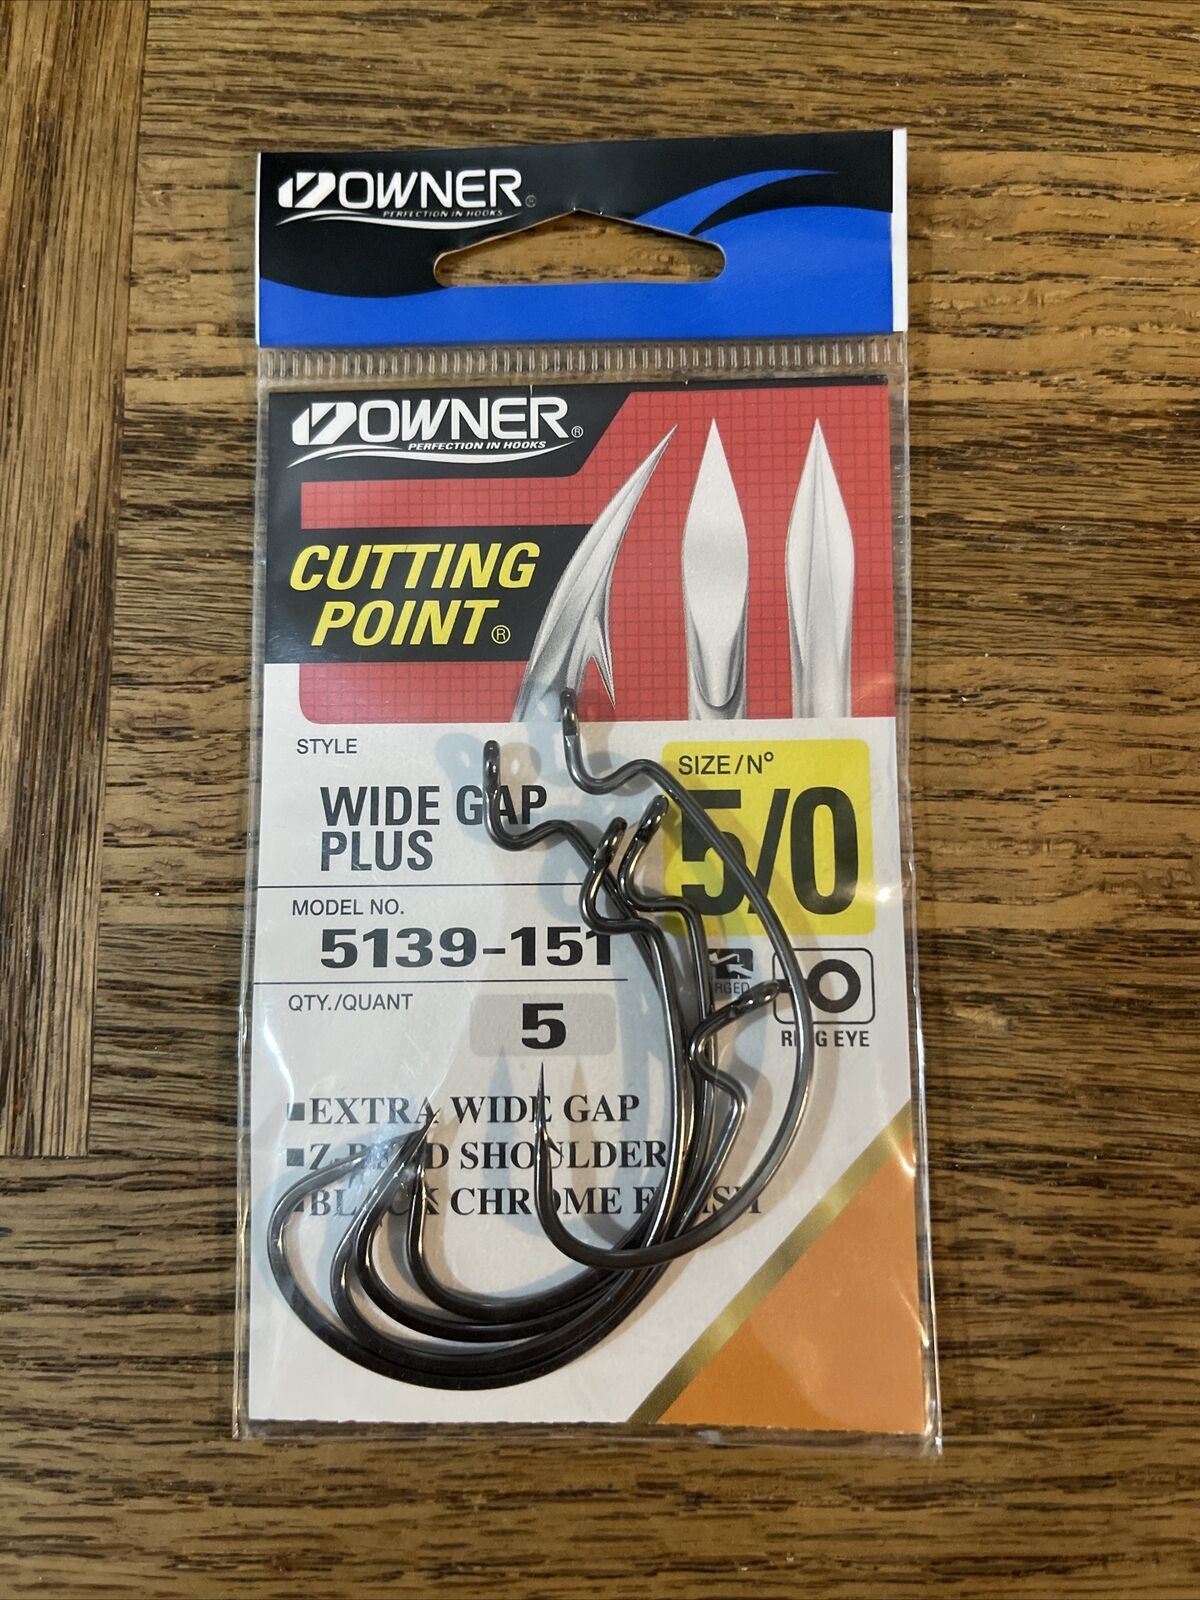 Owner cutting point wide gap plus hook size 5/0